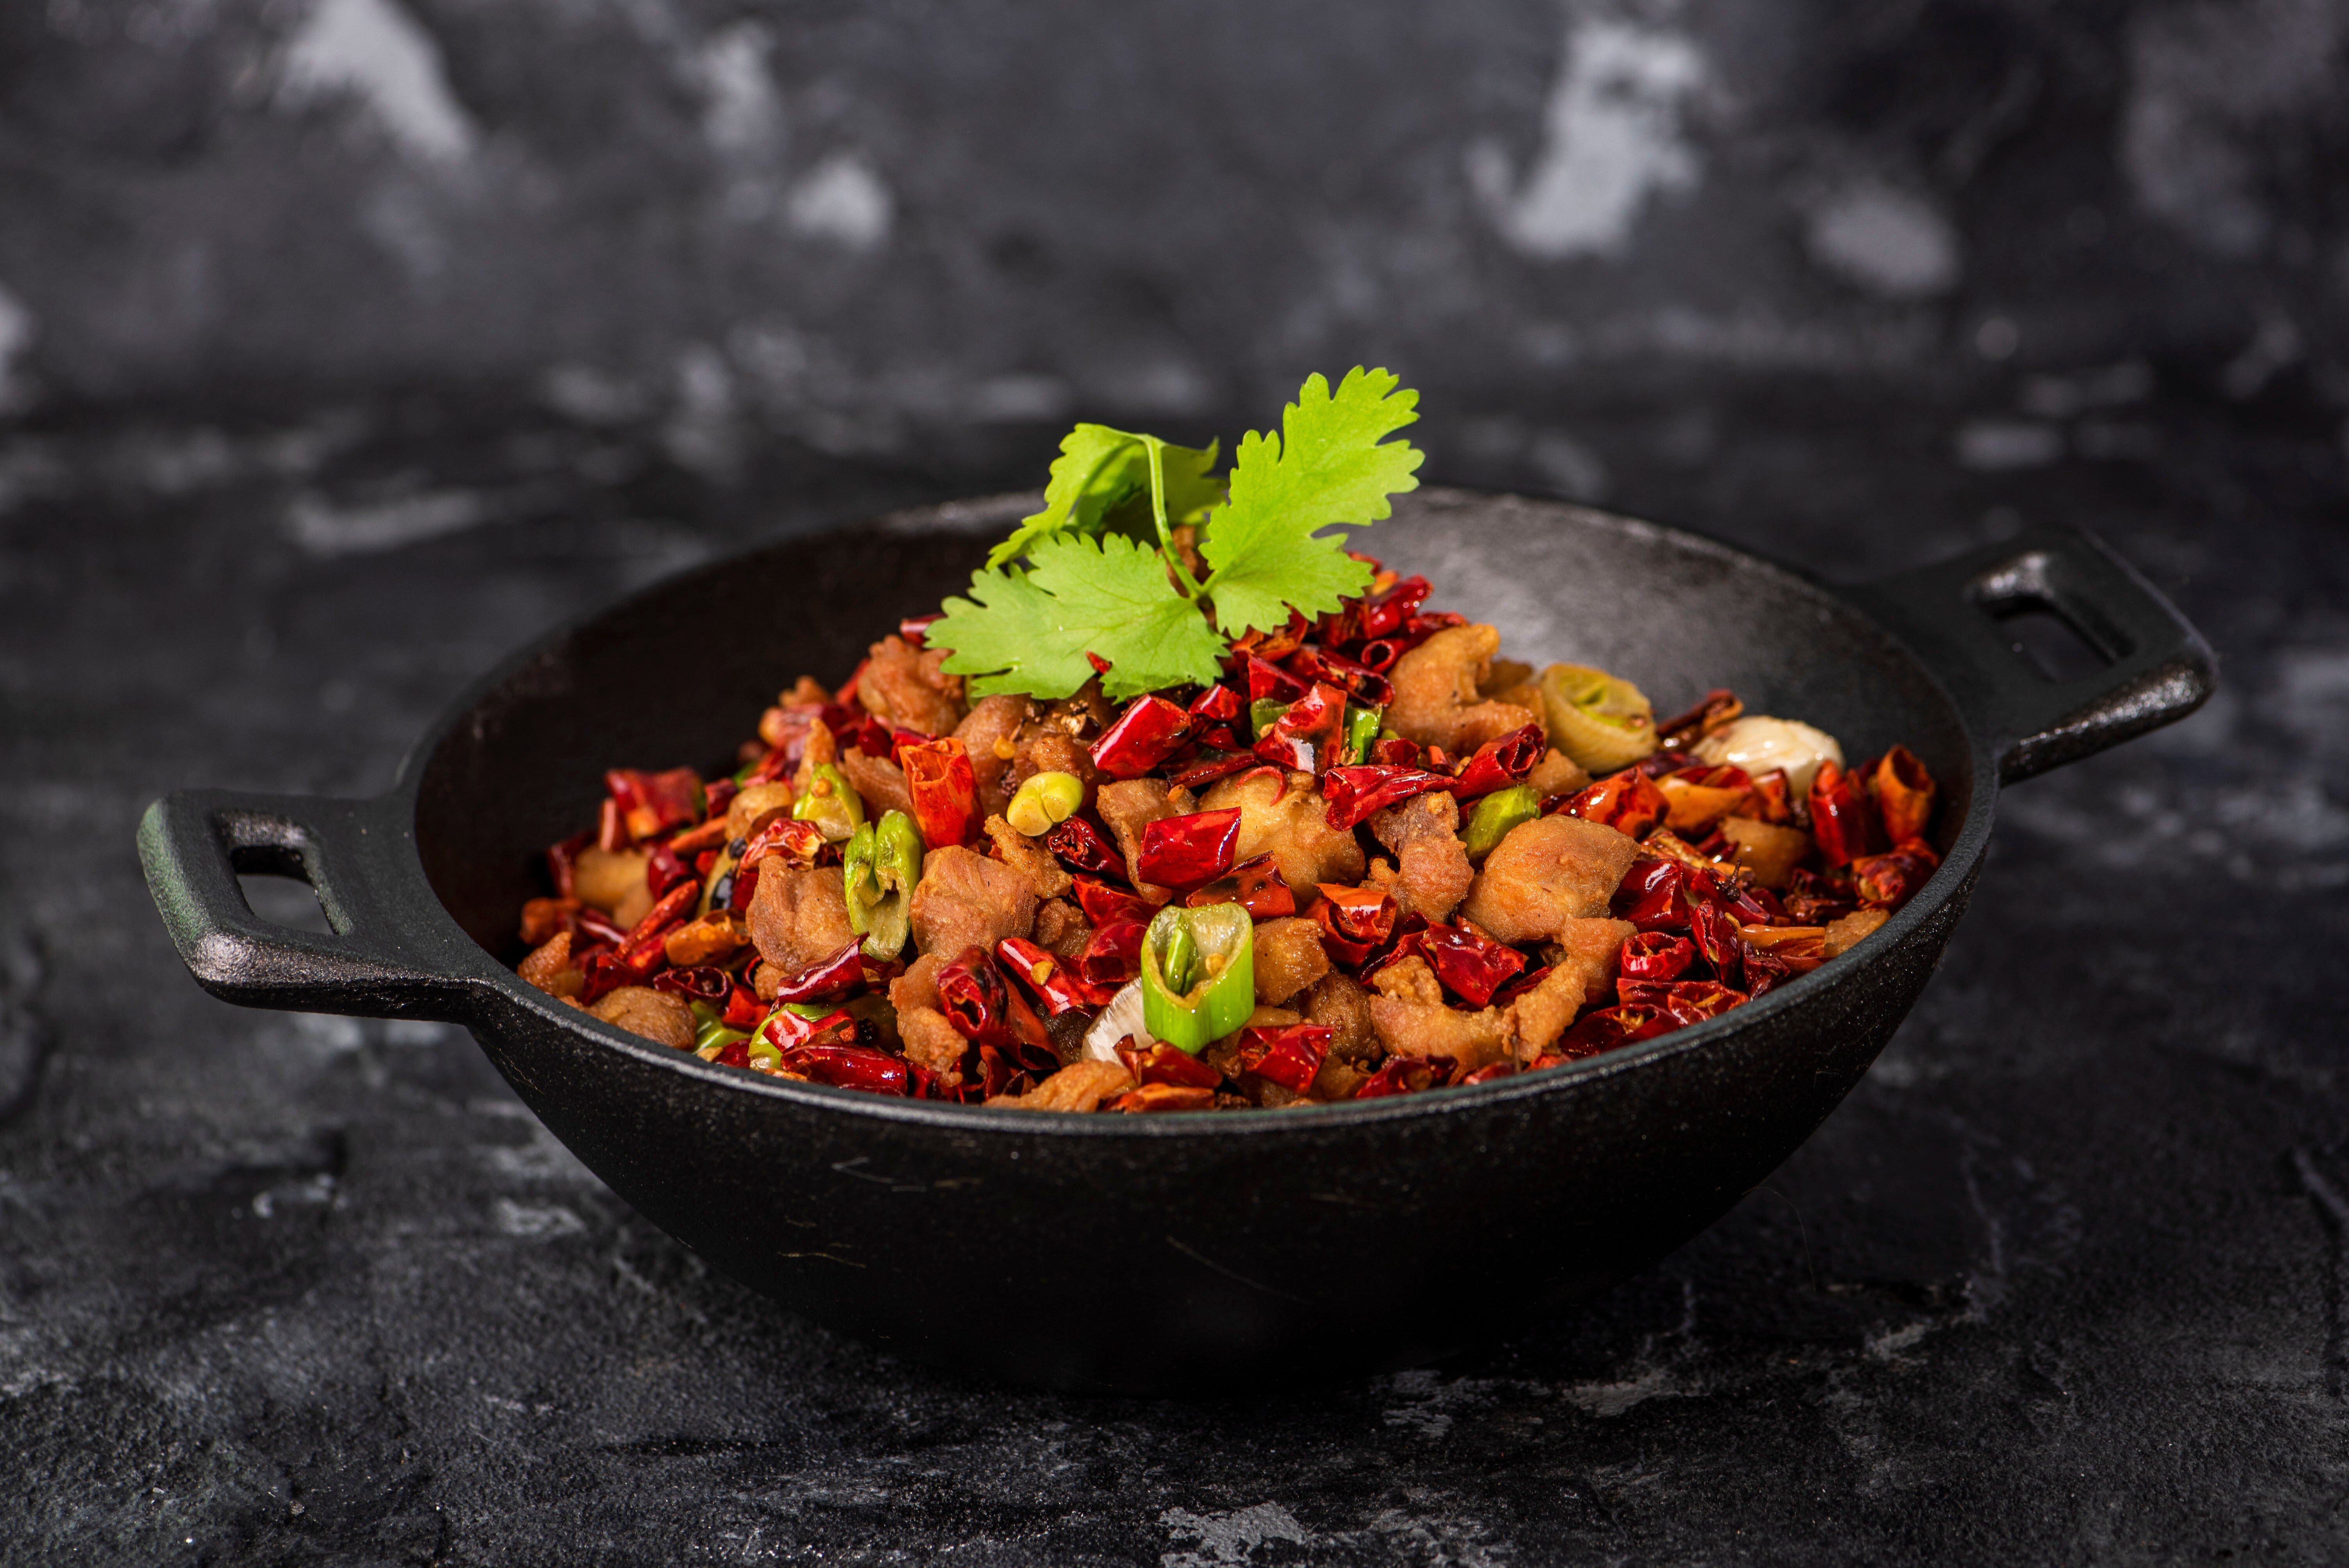 Chillies and mala pepper corns are staples of Sichuan food. Photo: Shutterstock